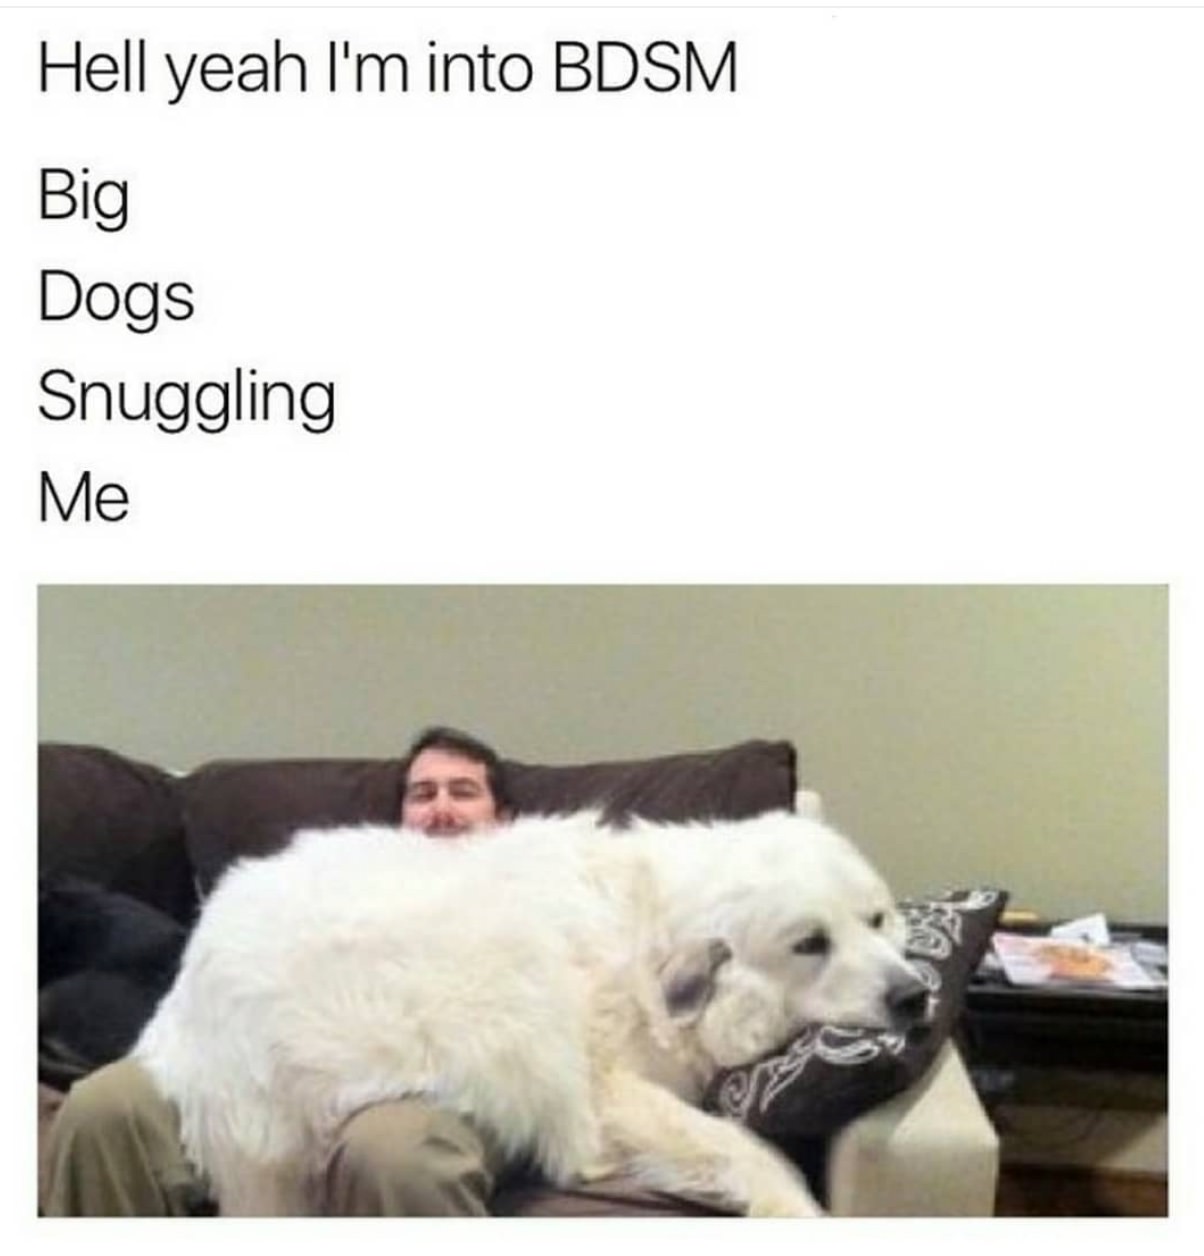 yeah im into bdsm - Hell yeah I'm into Bdsm Big Dogs Snuggling Me